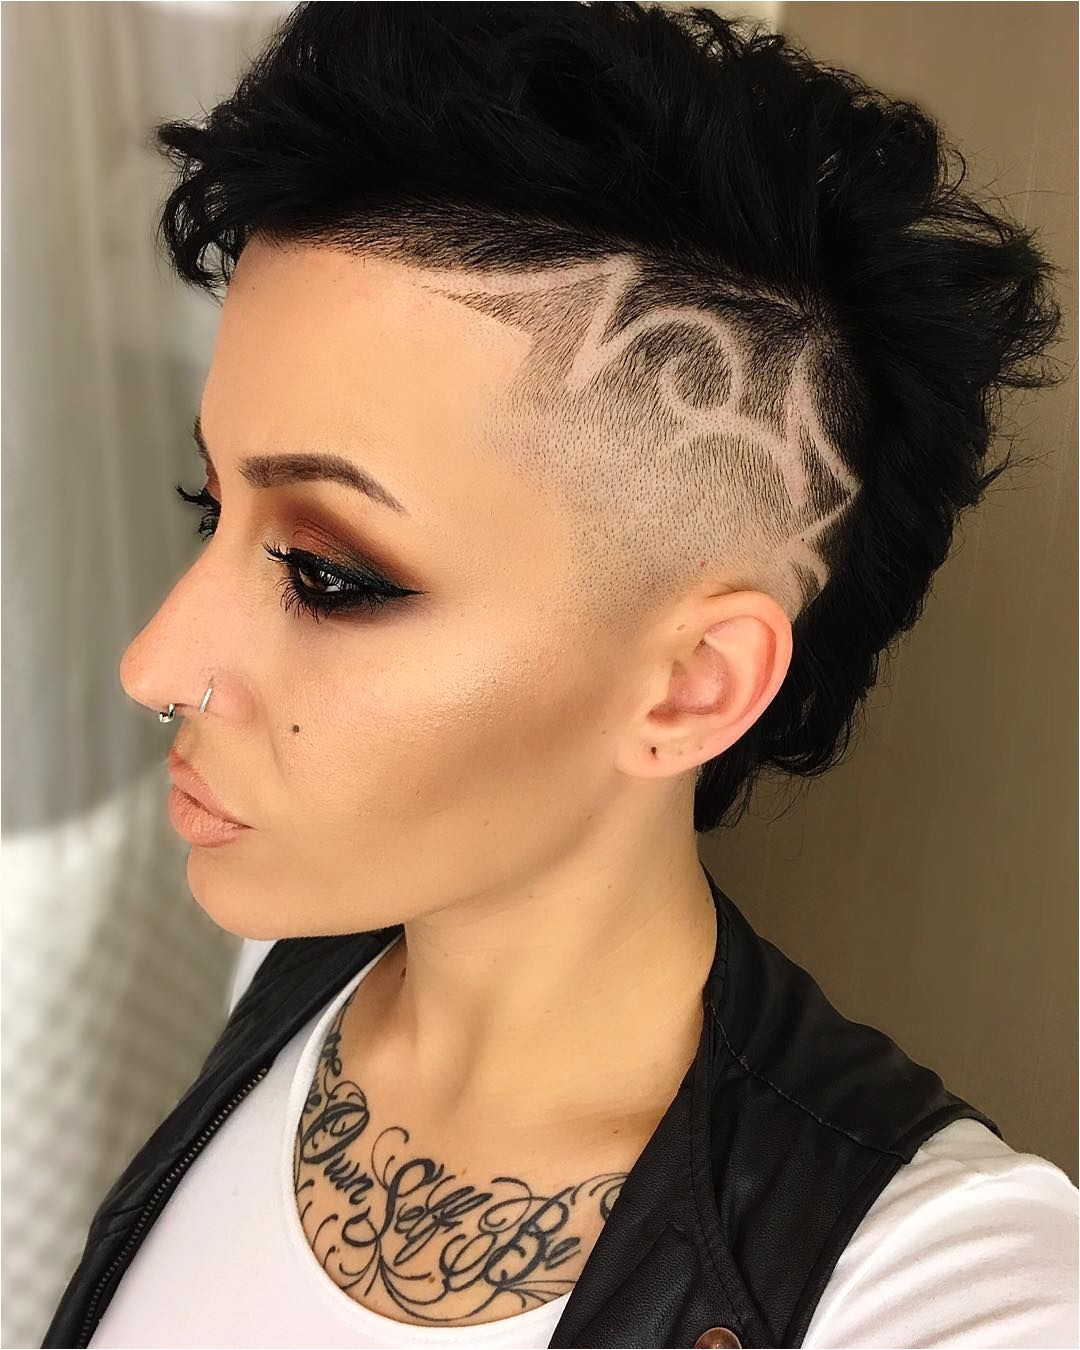 Girl Half Shaved Hairstyle
 Half Shaved Head Hairstyles for Girls